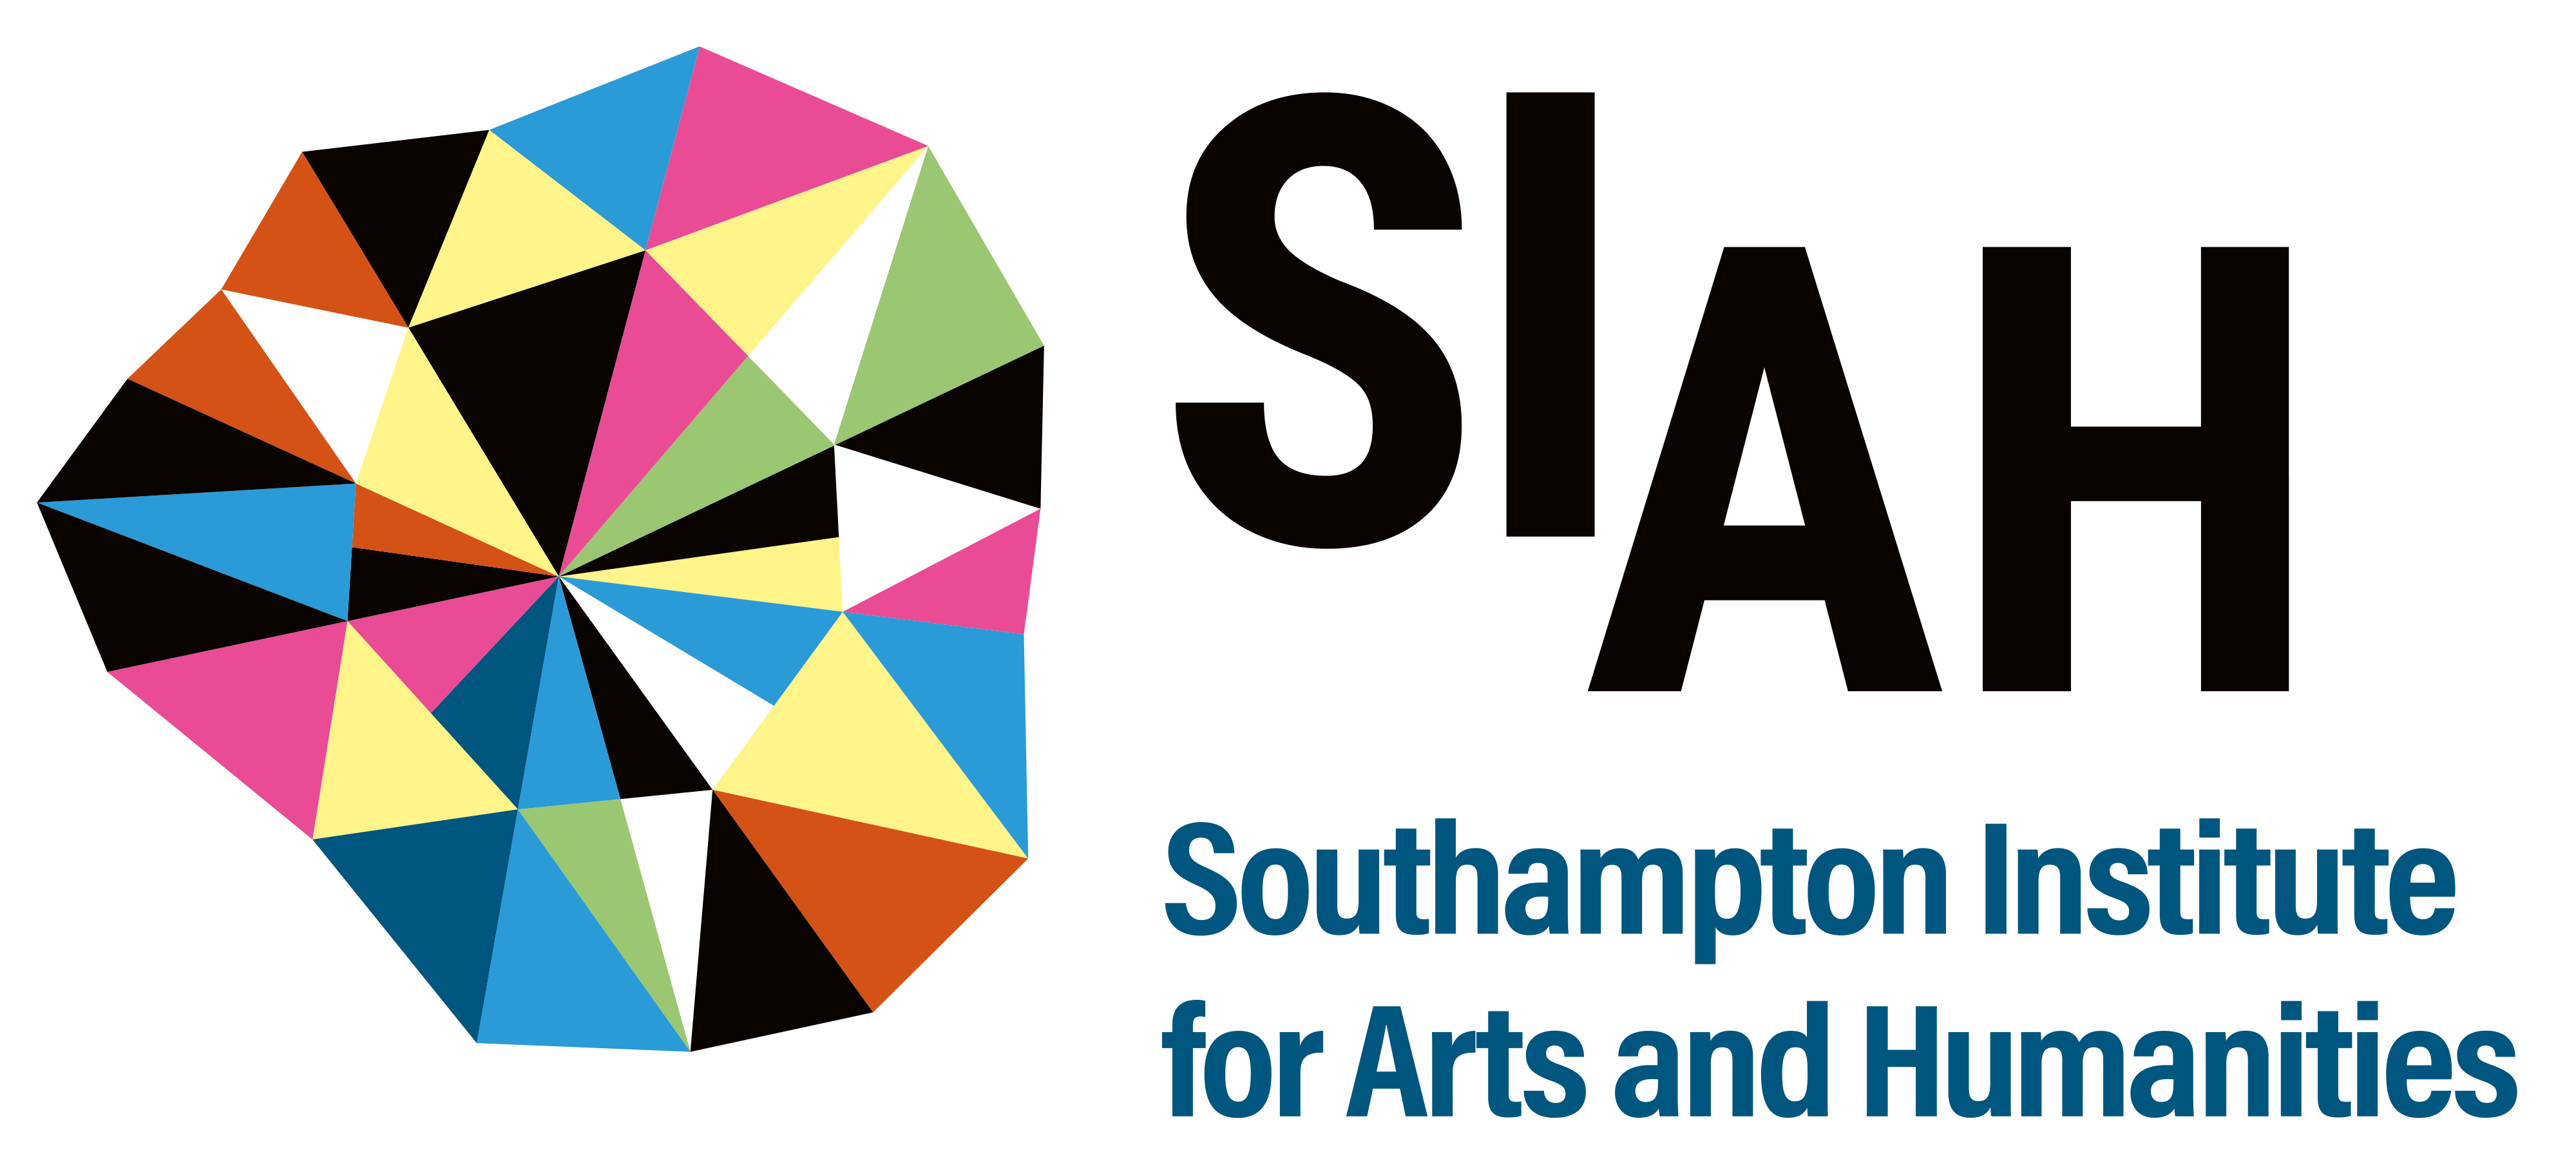 Southampton Institute for Arts and Humanities (SIAH) logo.